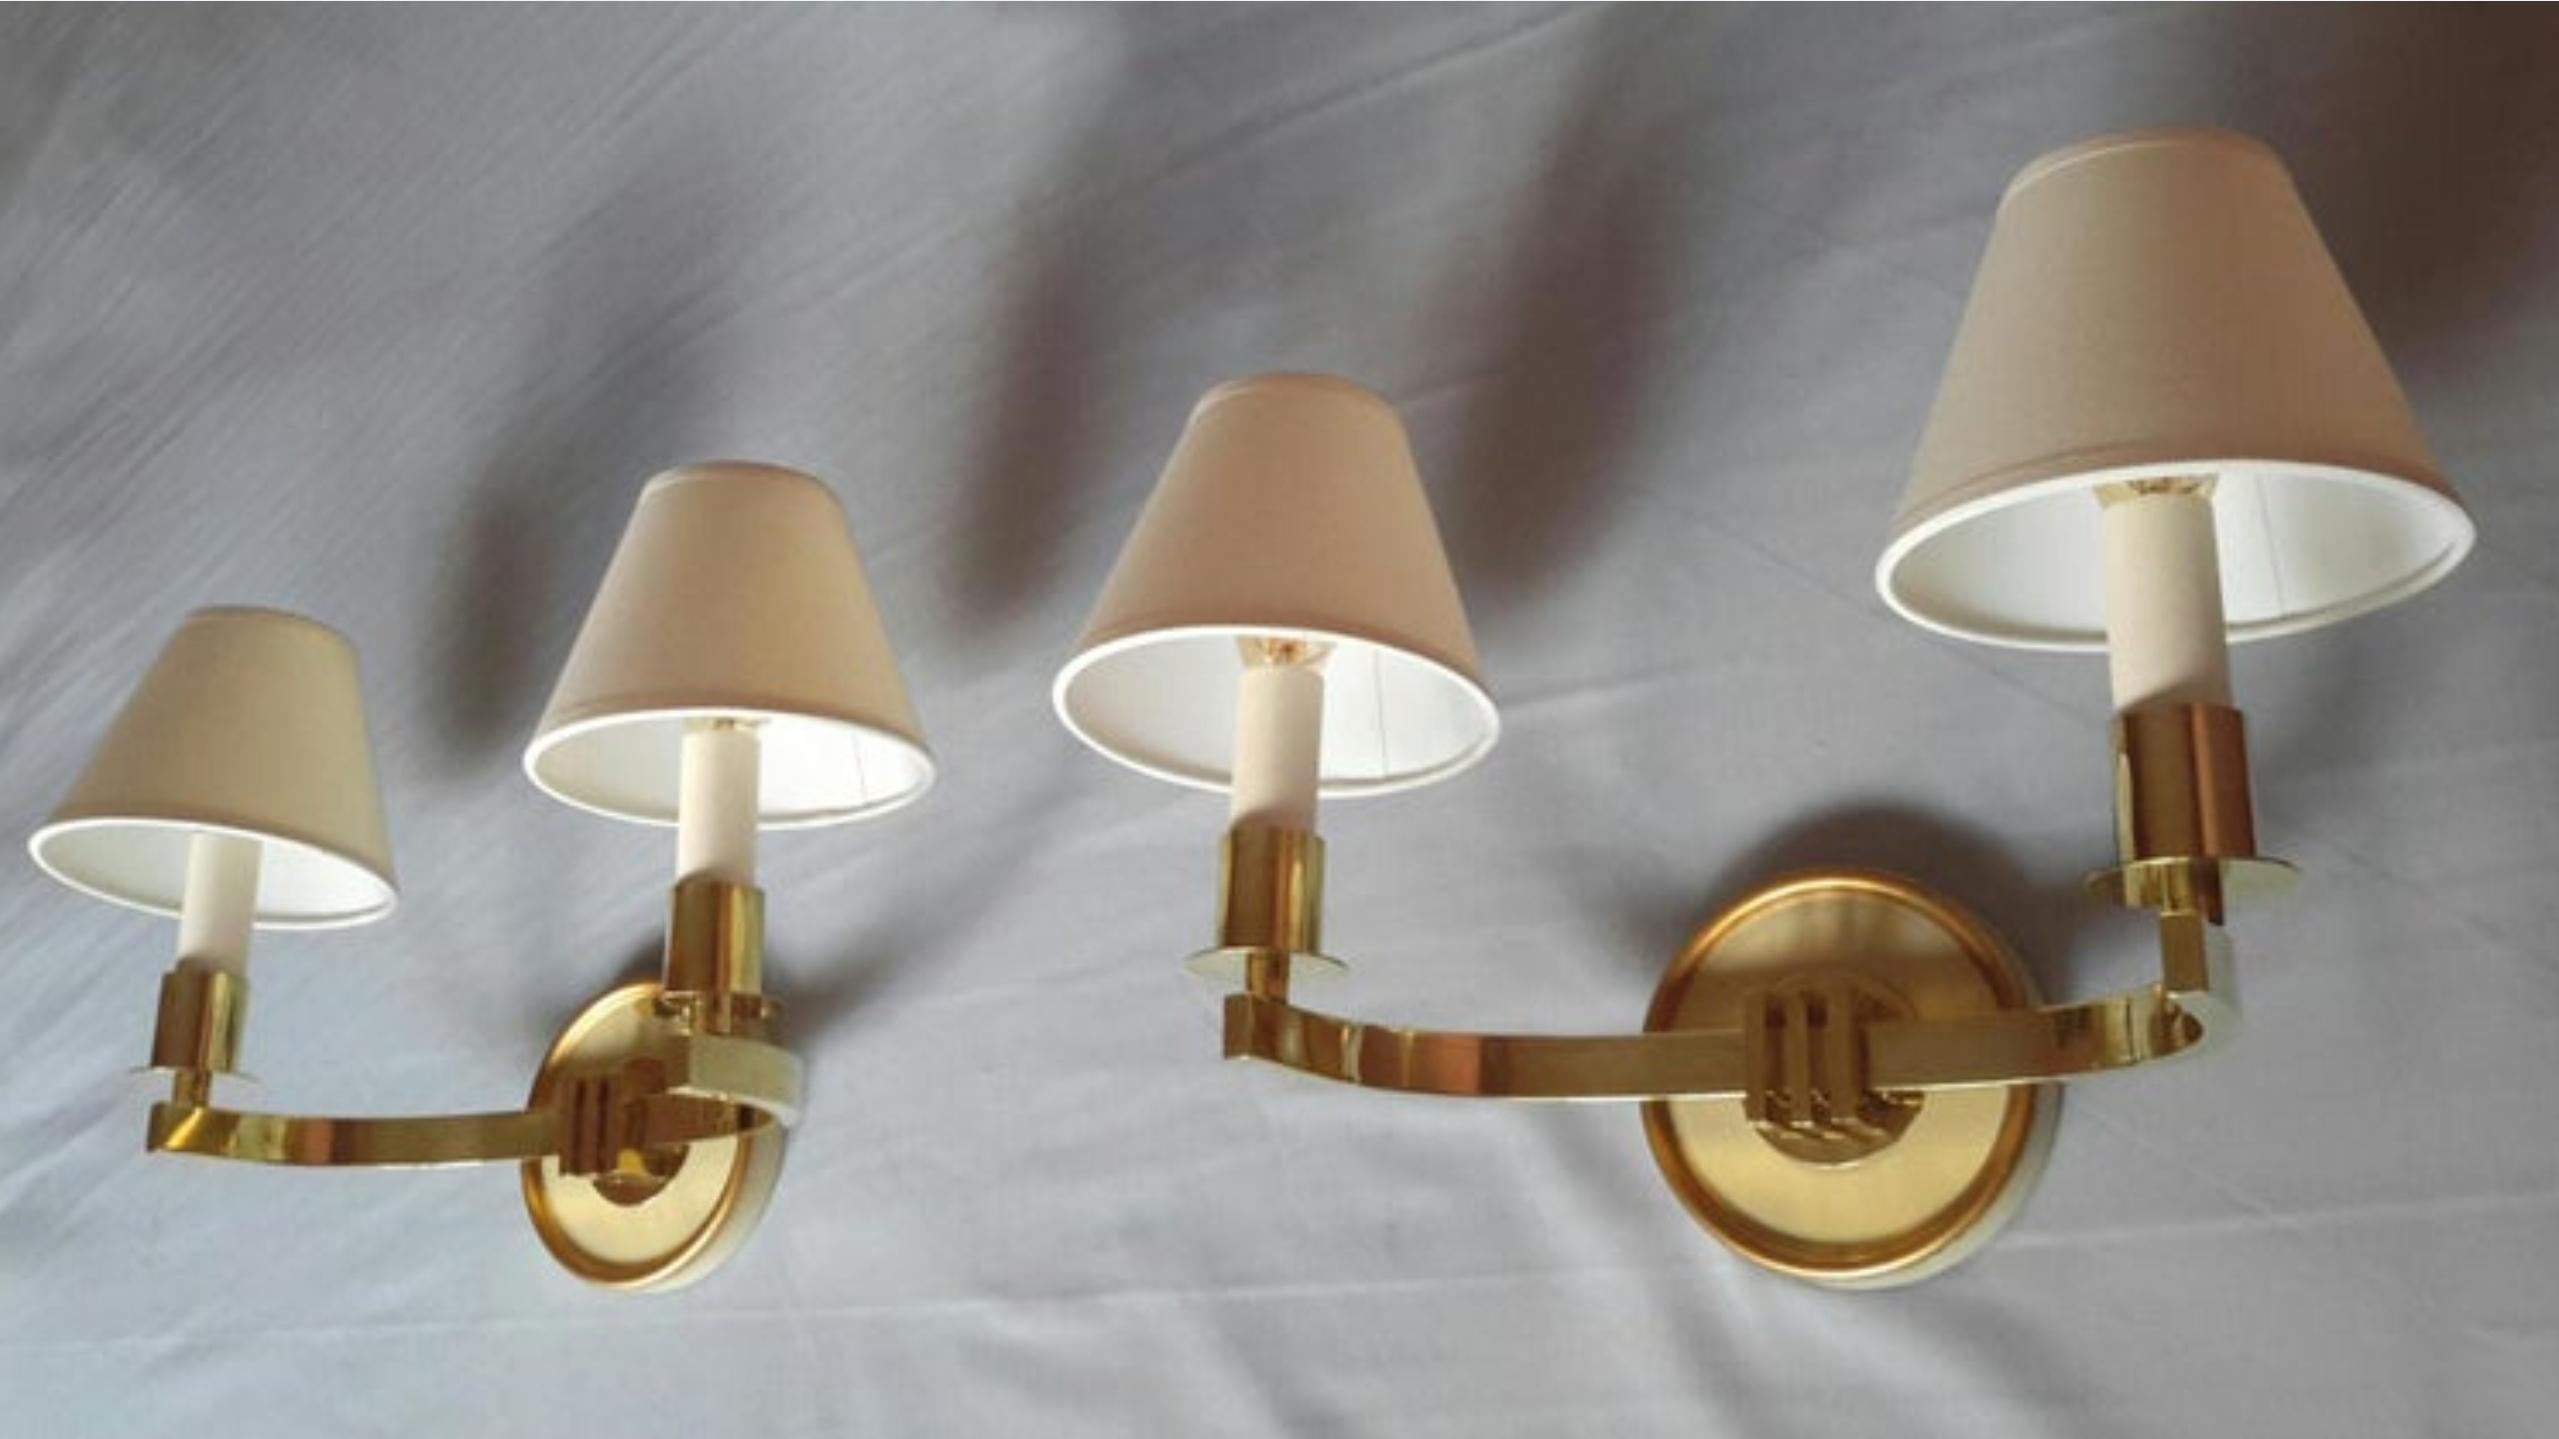 Pair of French Mid-Century Modern Gilt Bronze Wall Sconces, 1950's For Sale 8